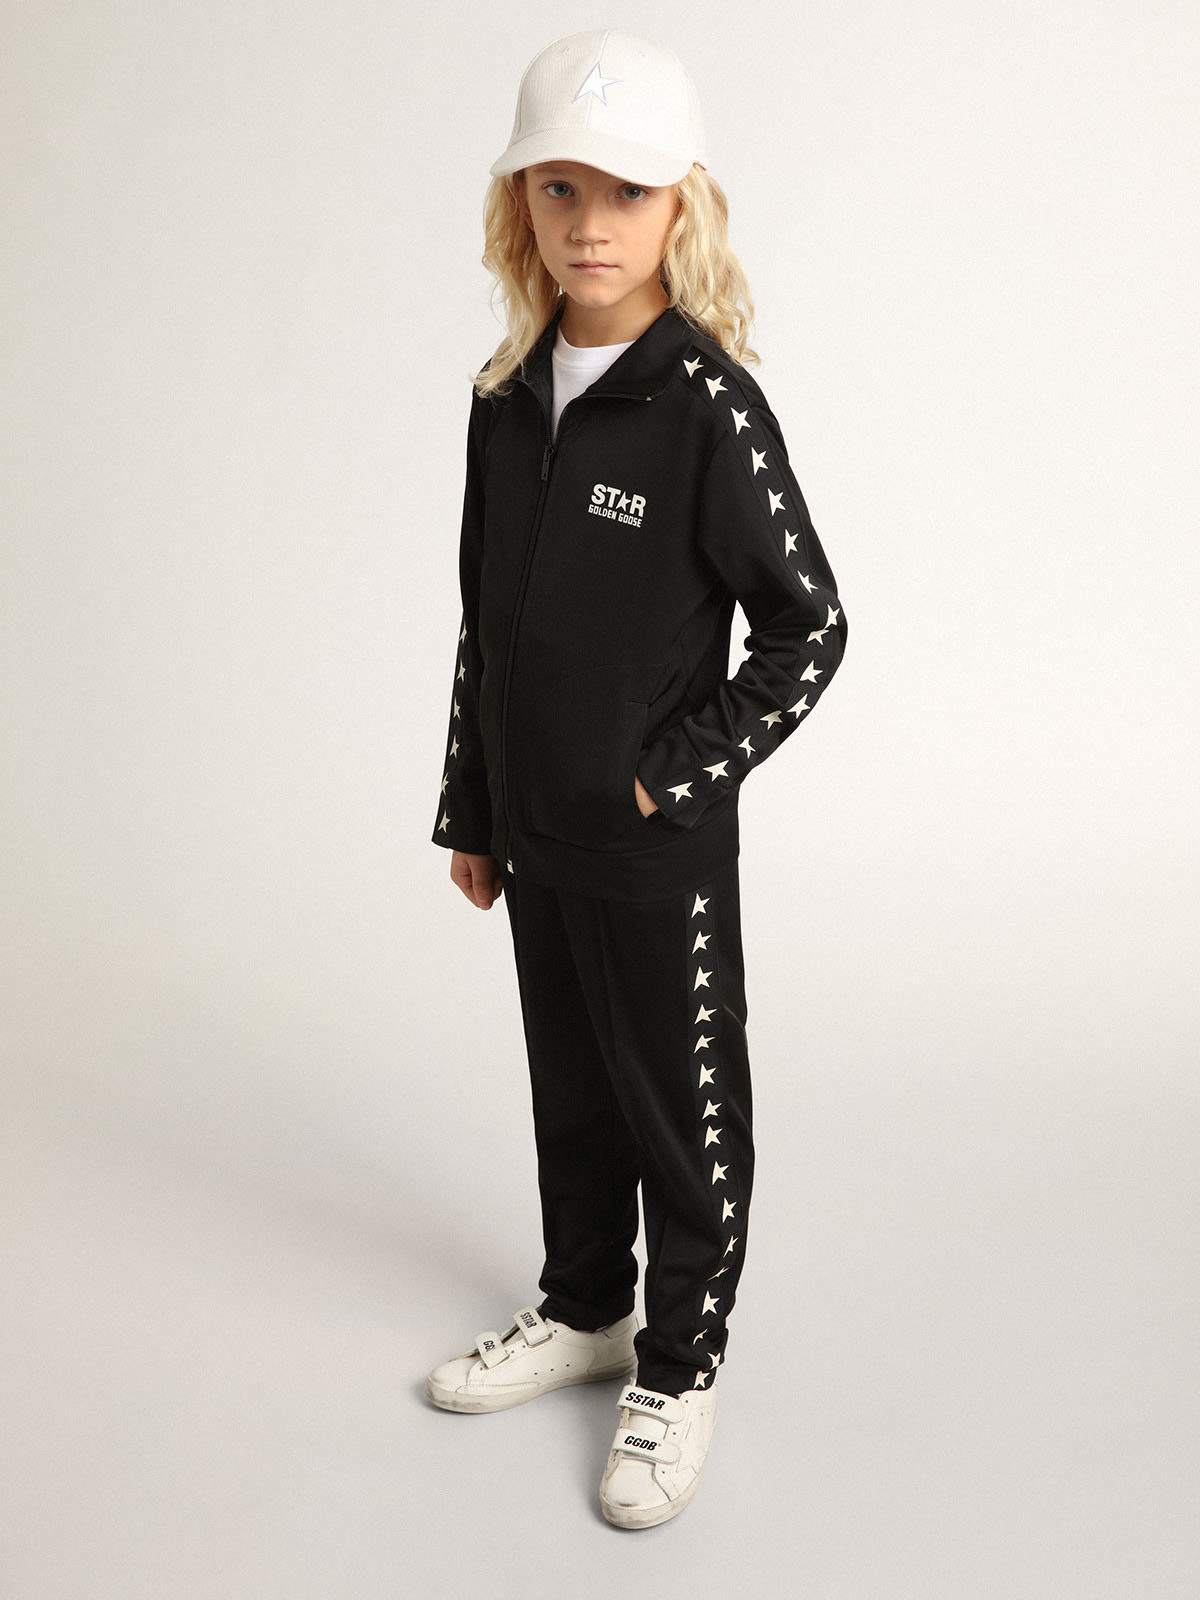 Golden Goose - Kids’ black zipped sweatshirt with contrasting white stars in 